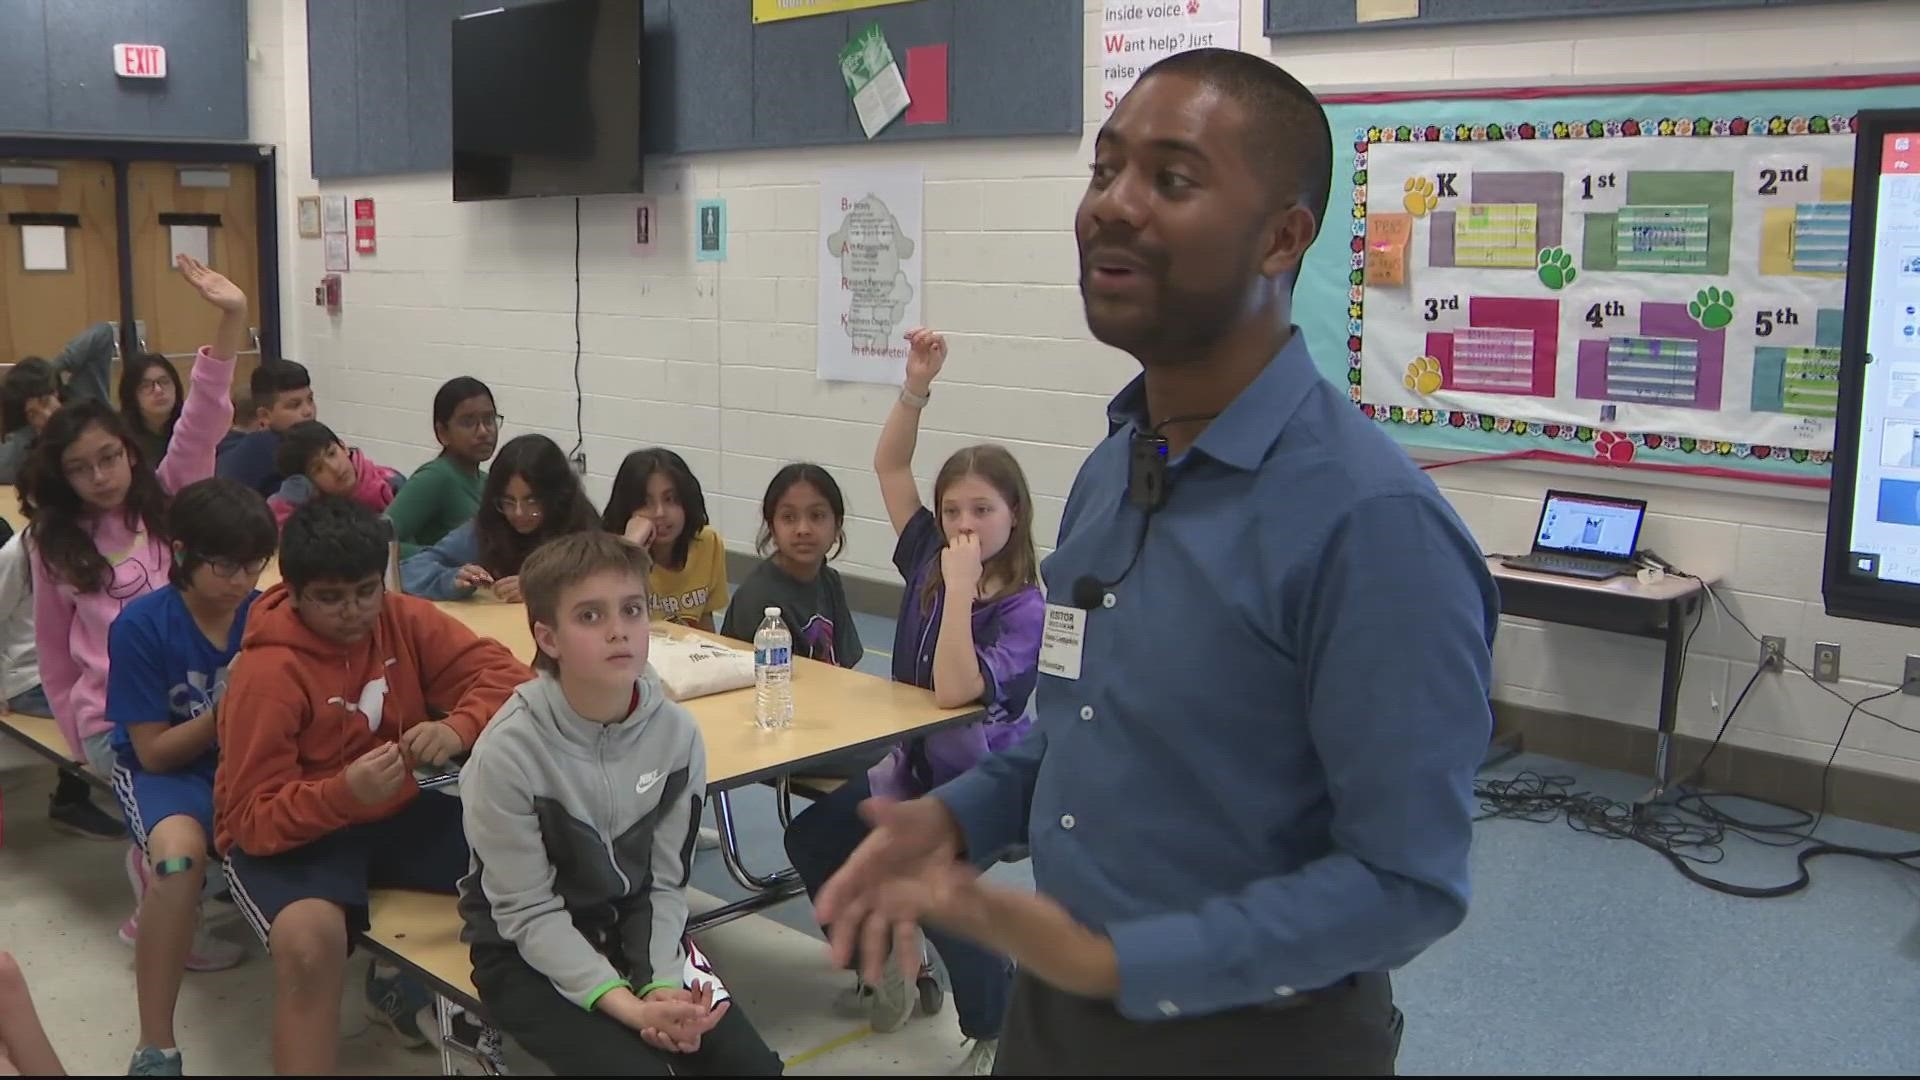 WUSA9's Chester Lampkin visited students at Legacy Elementary school for our Weather Classroom.